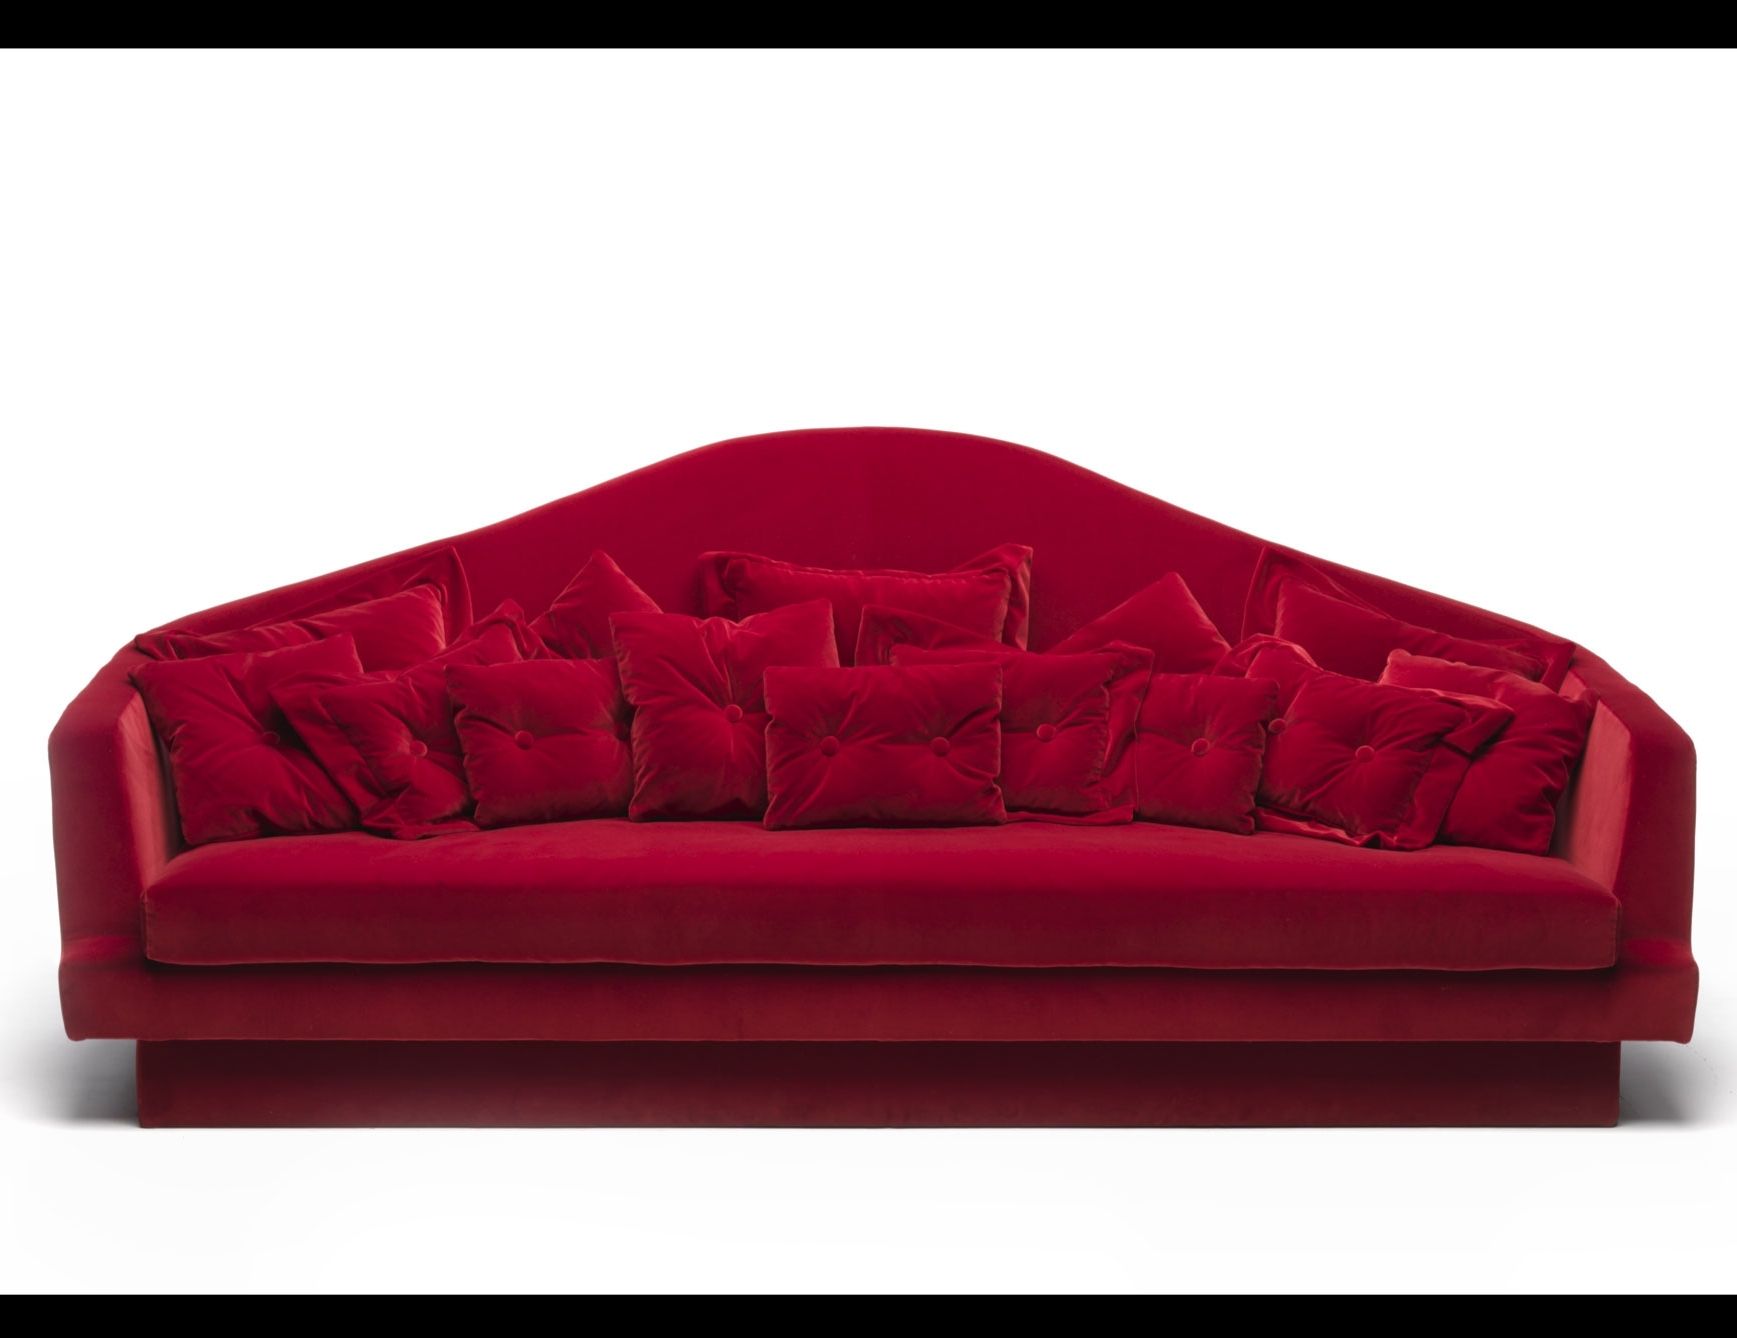 Red Sofa Chairs Intended For Most Current Nella Vetrina Red Carpet Luxury Italian Sofa Upholstered In Red Fabric (View 15 of 15)